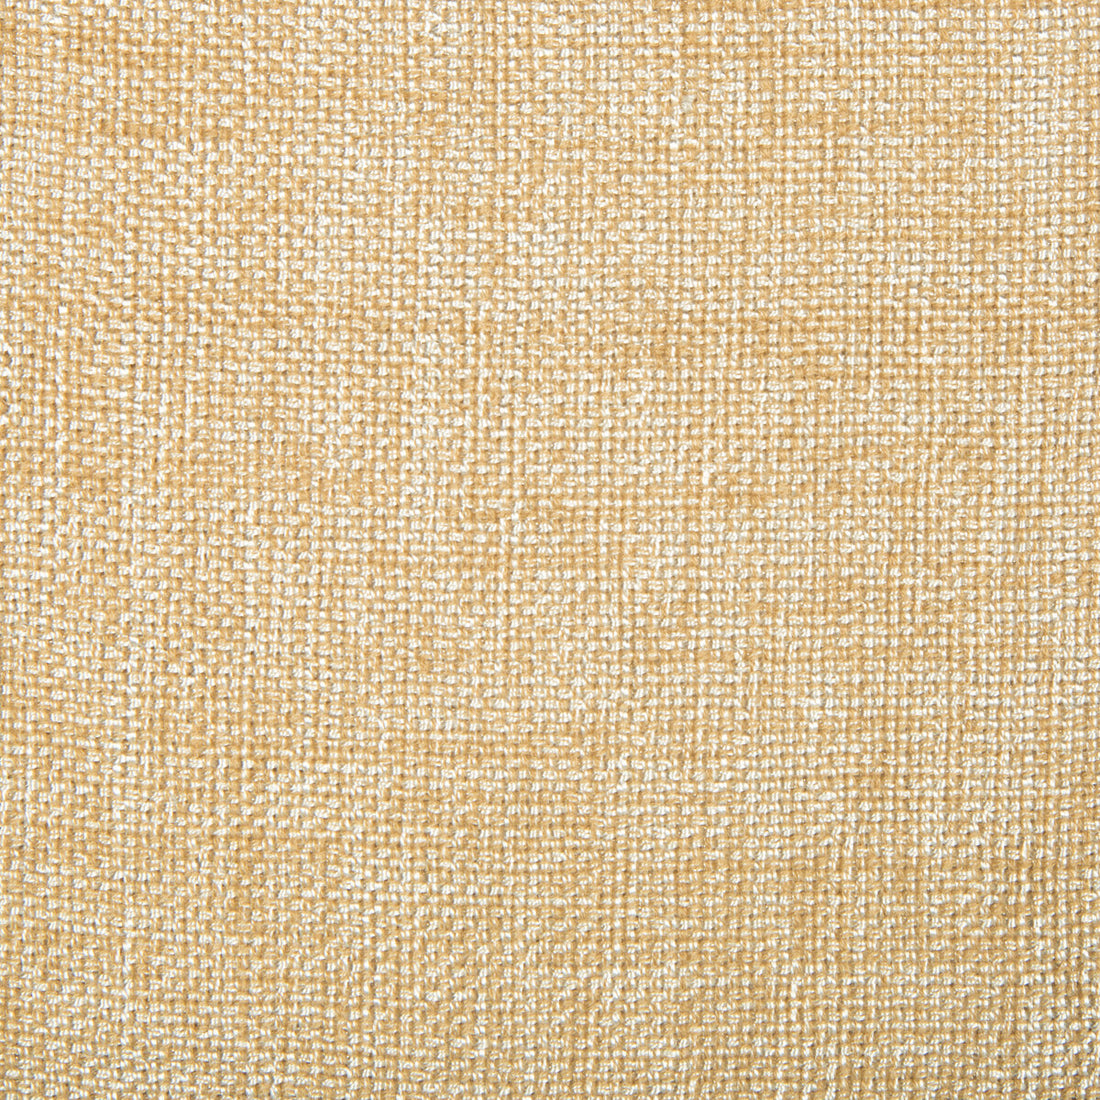 Kravet Contract fabric in 4458-1116 color - pattern 4458.1116.0 - by Kravet Contract